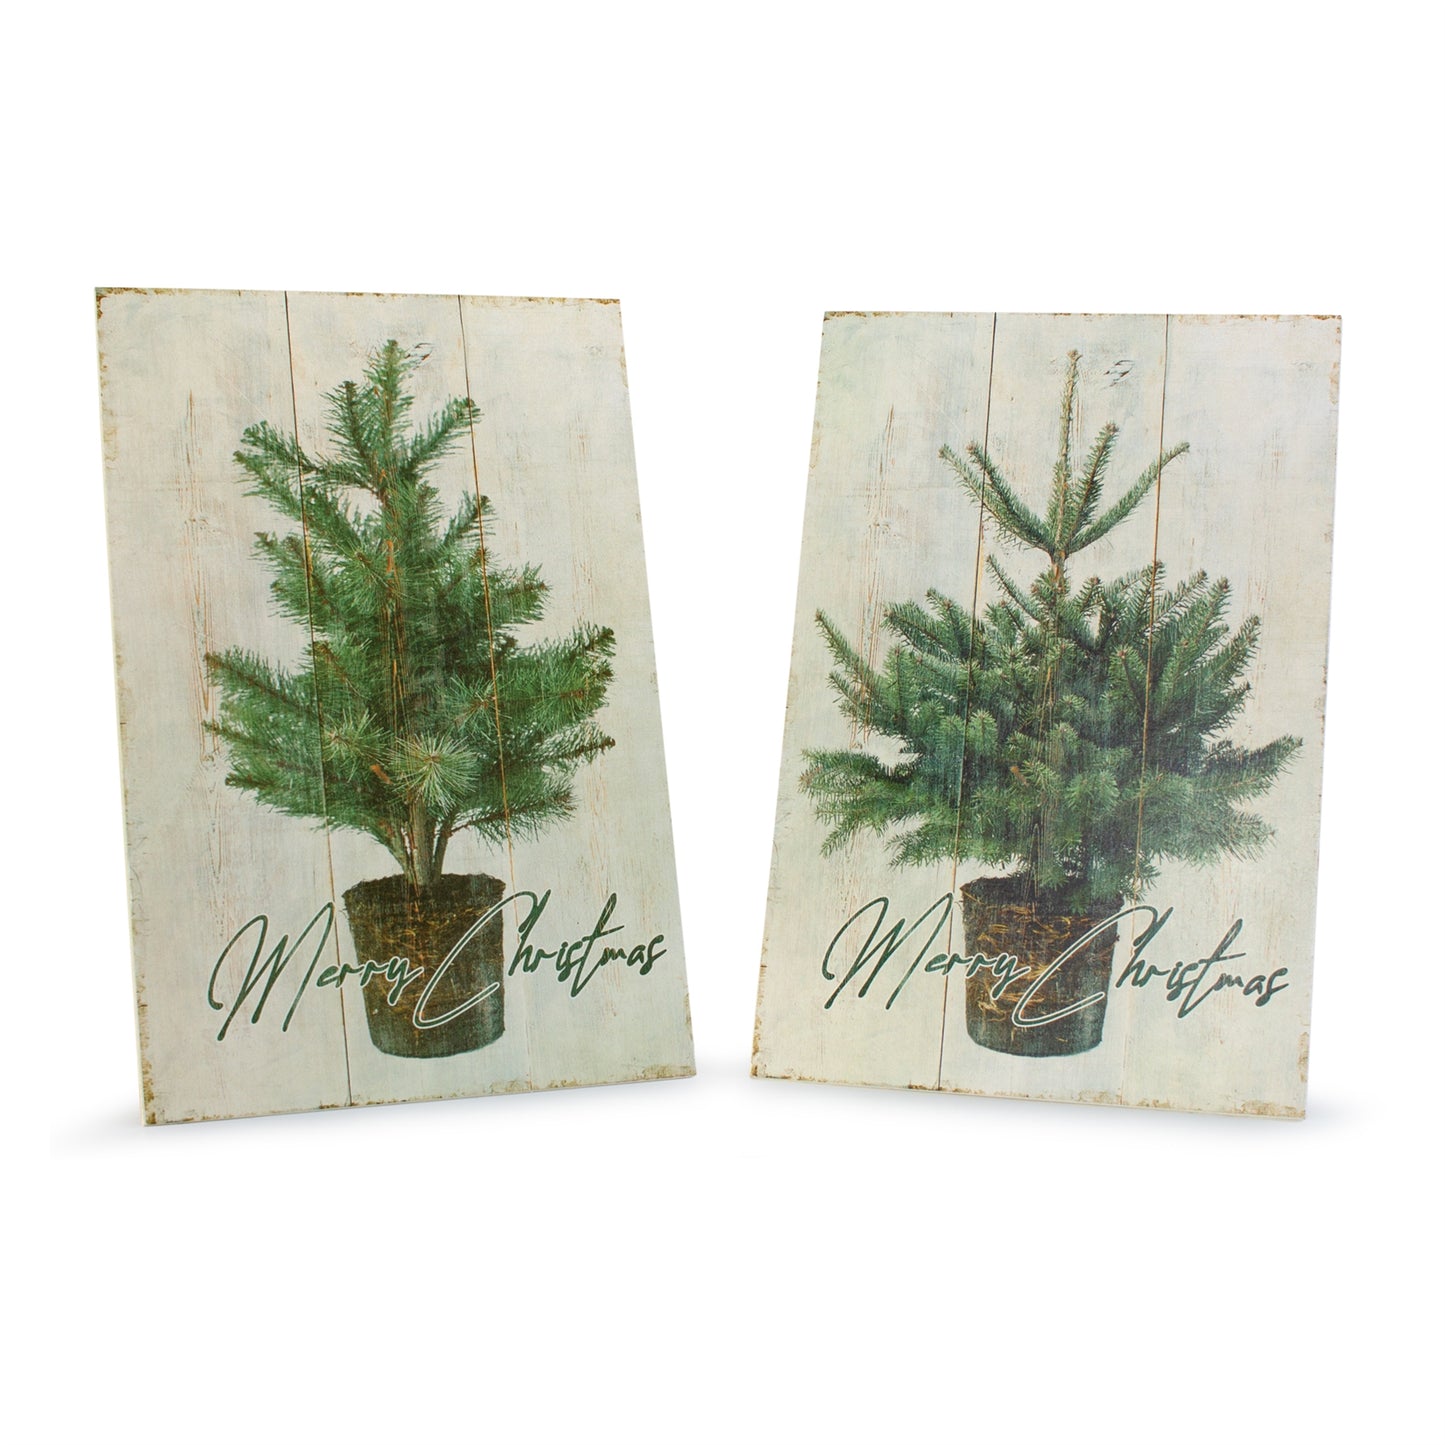 Wooden Merry Christmas Tree Plaque (Set of 2)